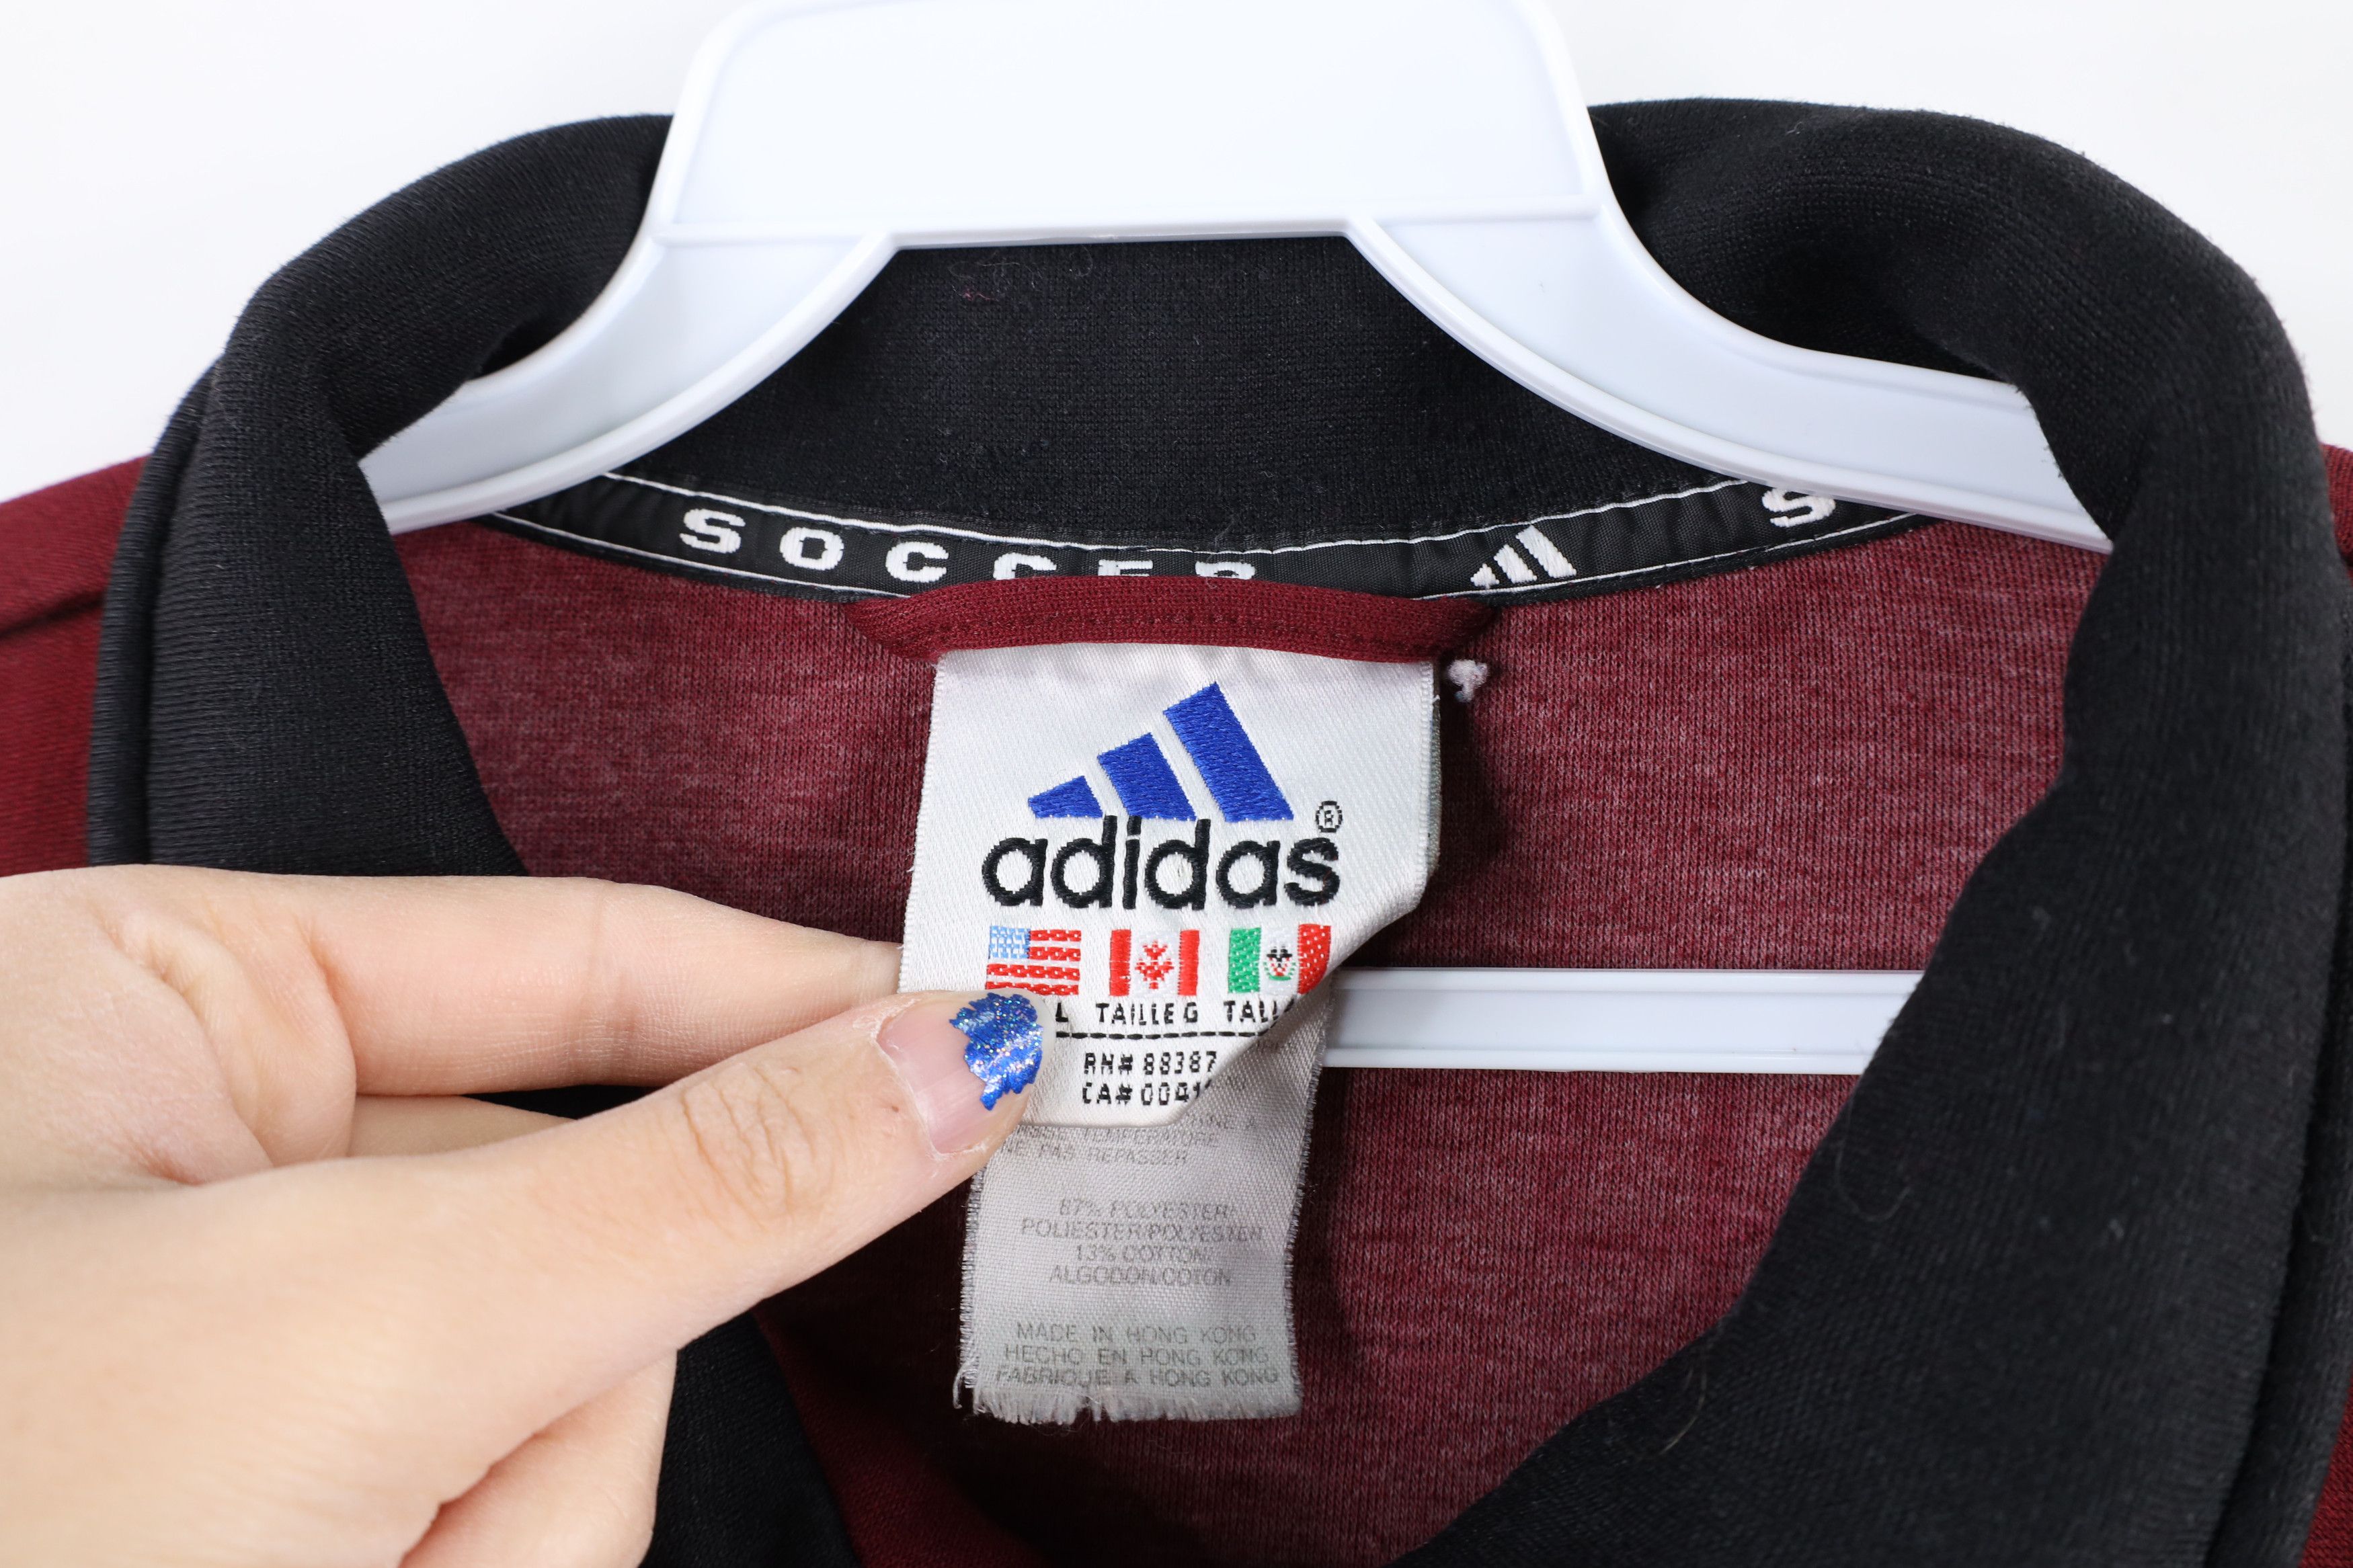 Adidas Vintage Adidas Spell Out Striped Soccer Warm Up Jacket Size US L / EU 52-54 / 3 - 7 Thumbnail